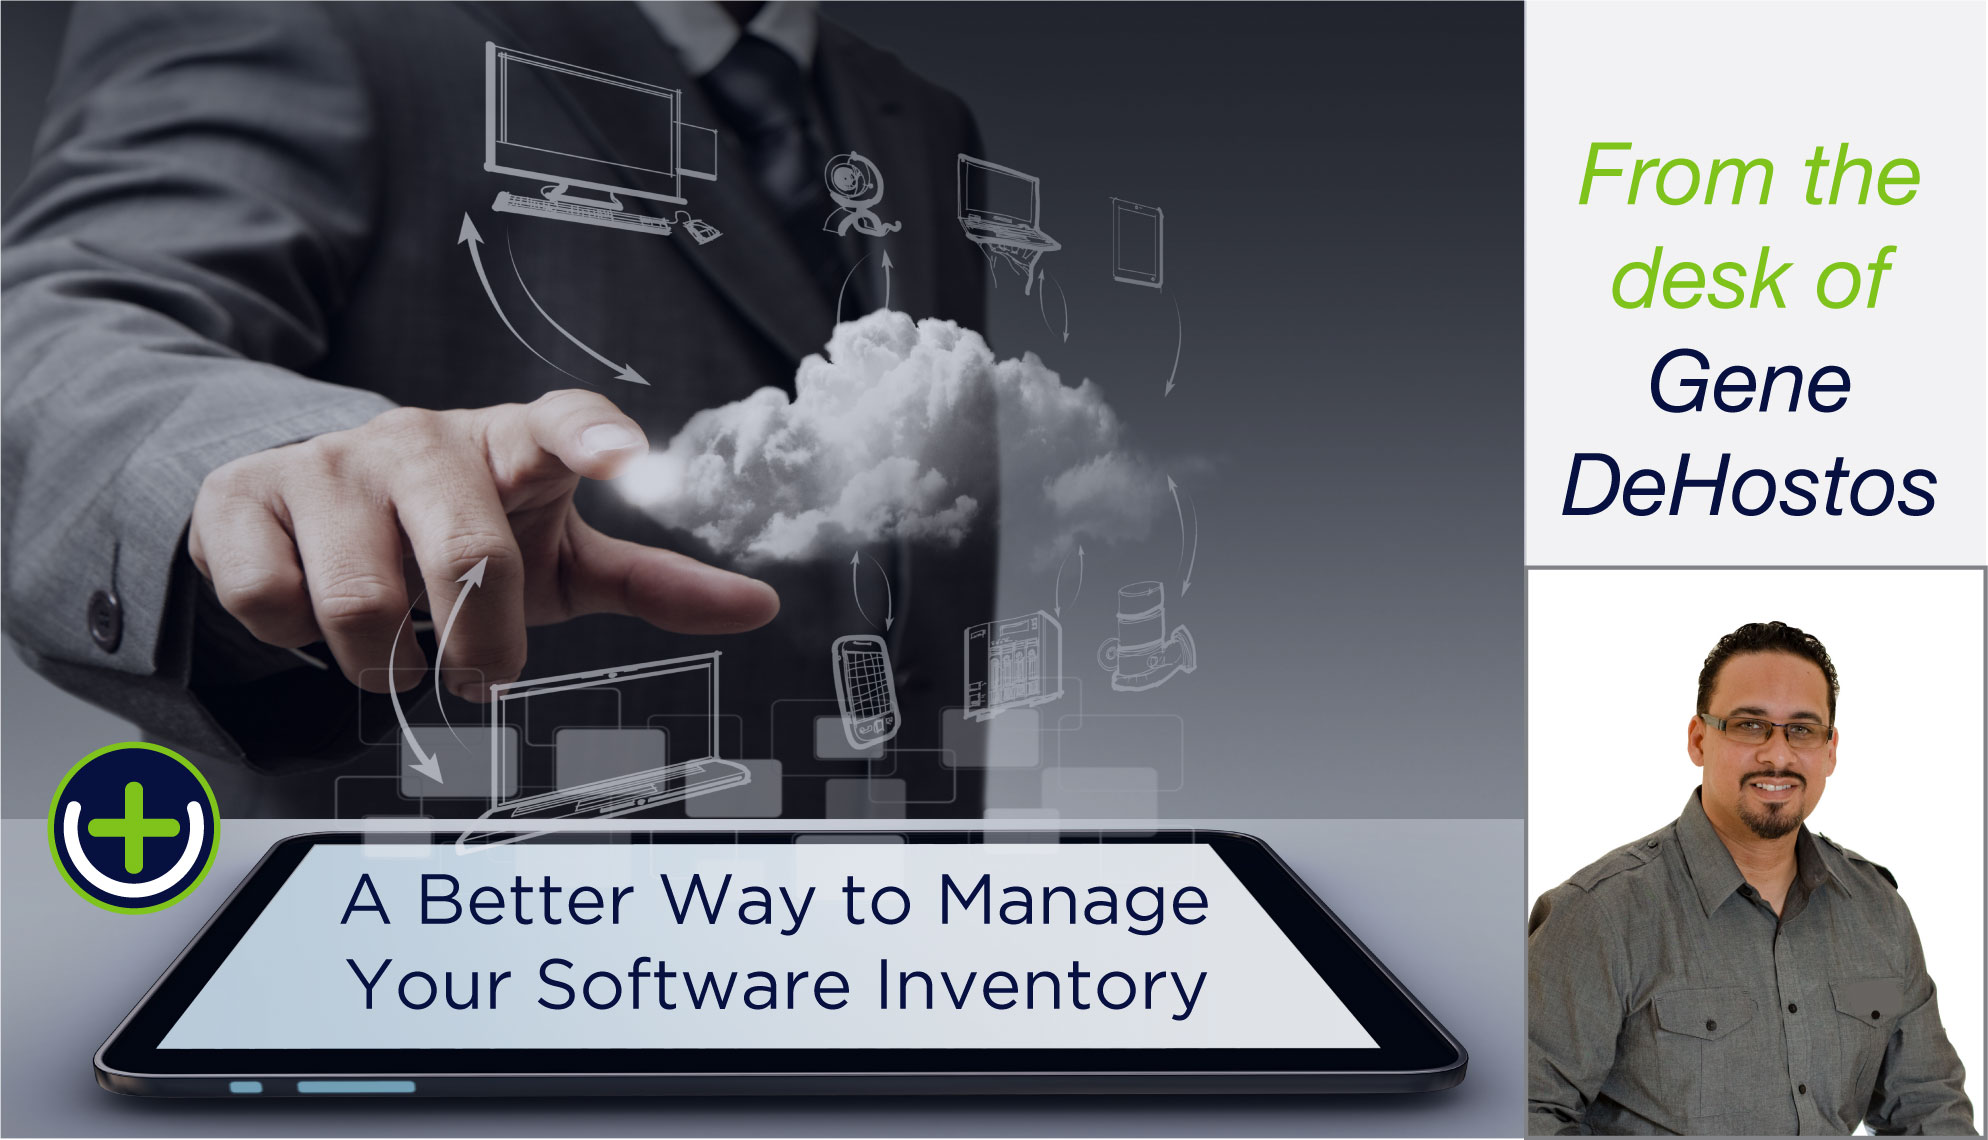 A Better Way to Manage Your Software Inventory